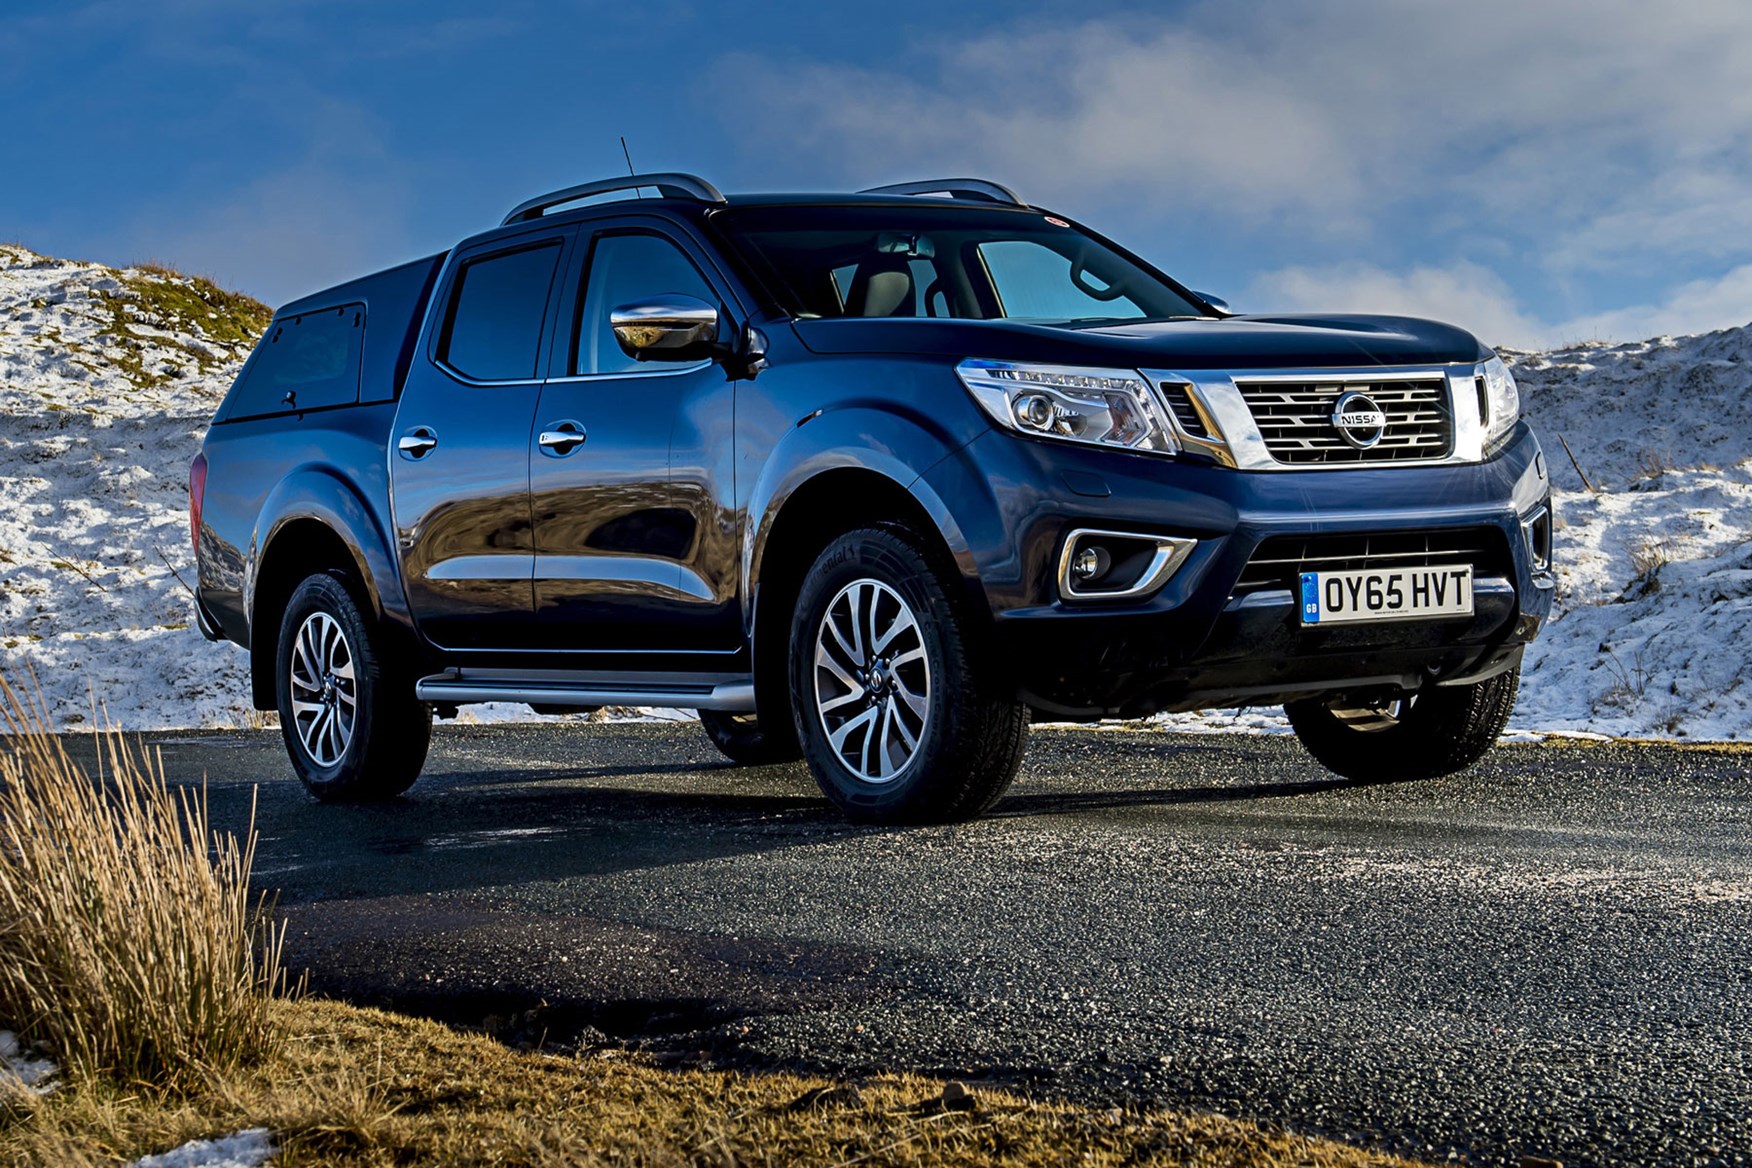 Nissan Navara review - front view, blue with hardtop